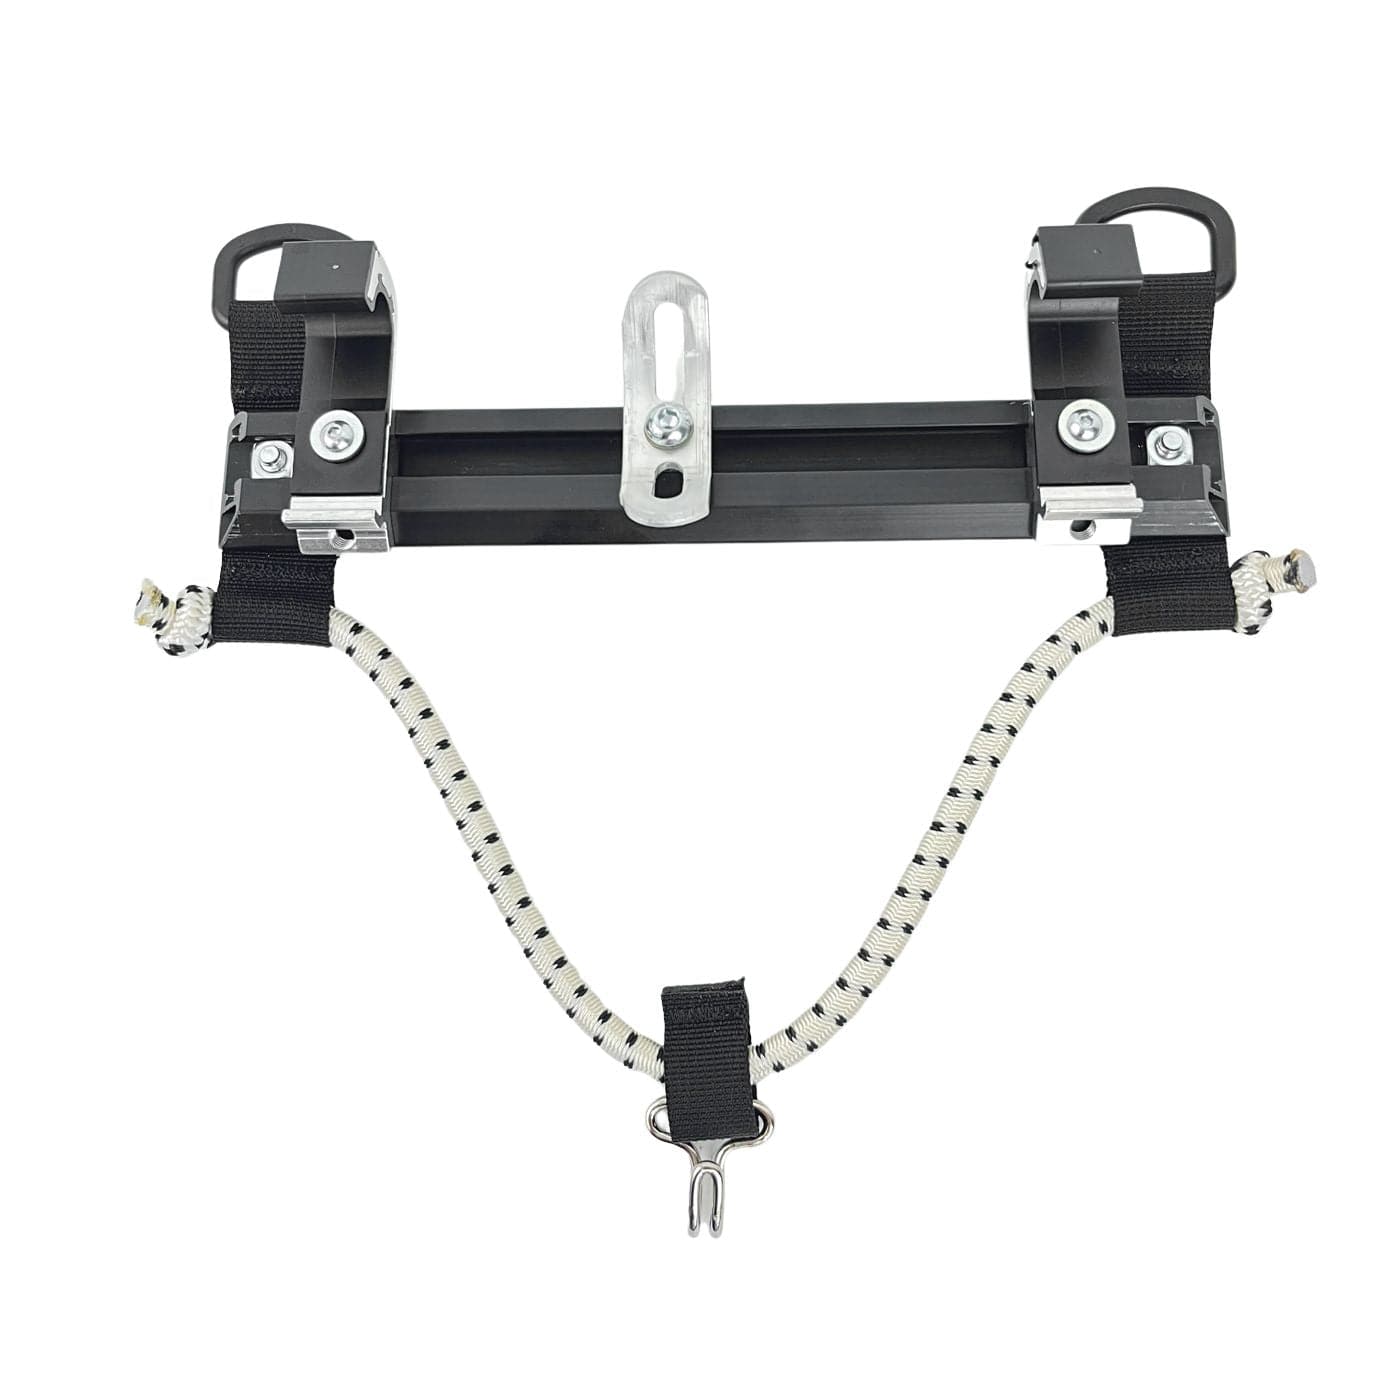 Arkel Bike Bags 8" Track Hook Kit Manual Locking System - Complete with mounting hardware and lower hook/bungee and mounting hardware